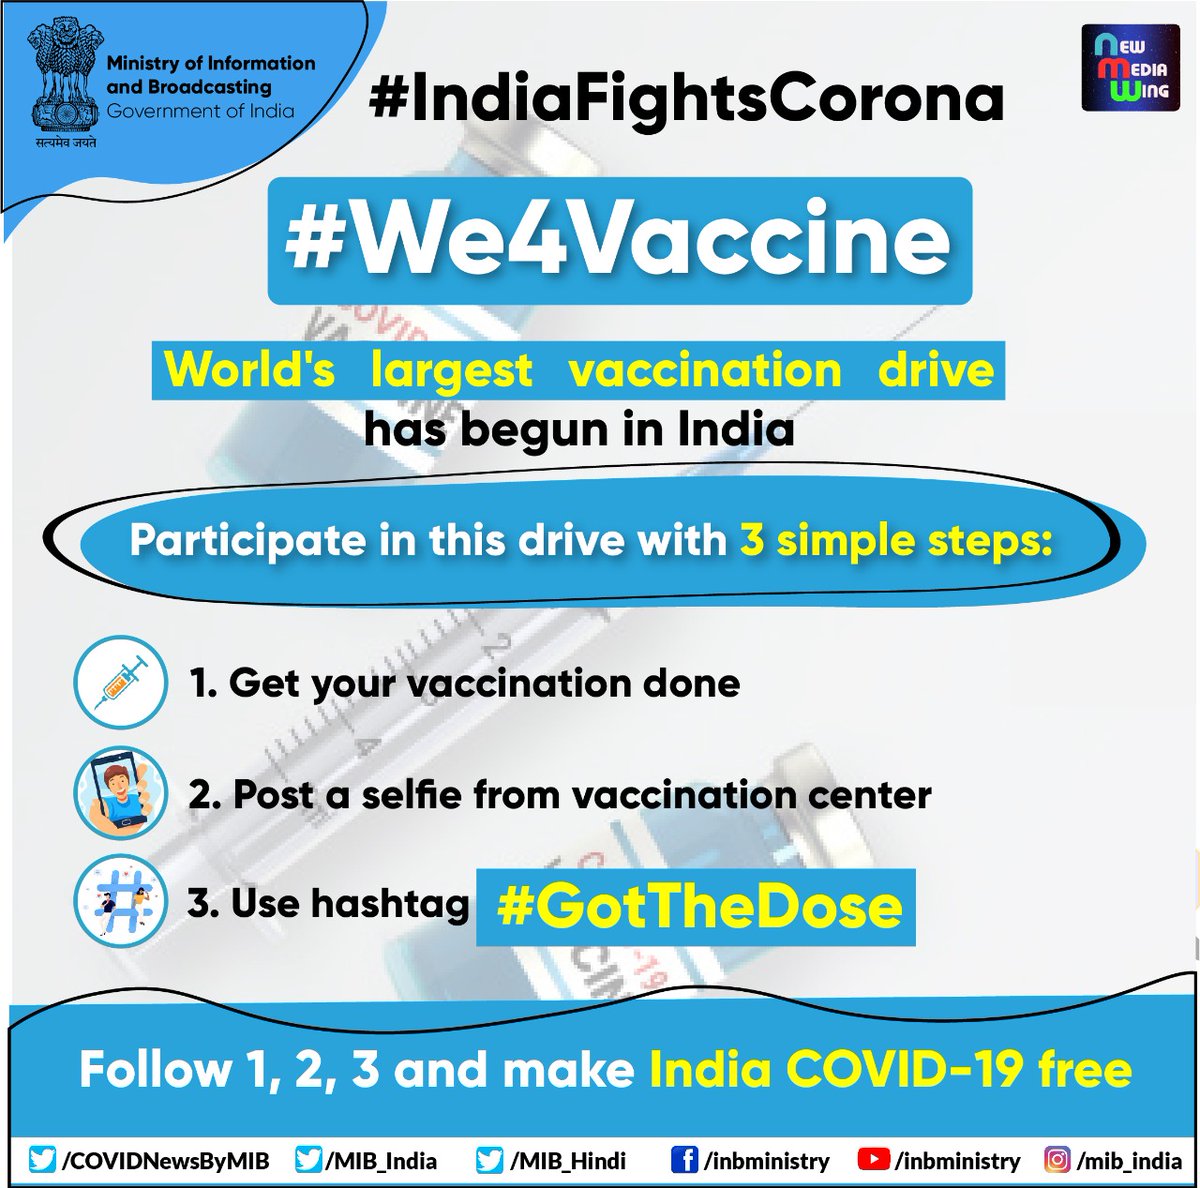 Indiafightscorona On Twitter We4vaccine World S Largest Vaccination Drive Has Begun In India Participate In This Drive With 3 Simple Steps 1 Get Your Vaccination Done 2 Post A Selfie From Vaccination Center 3 Use Hashtag